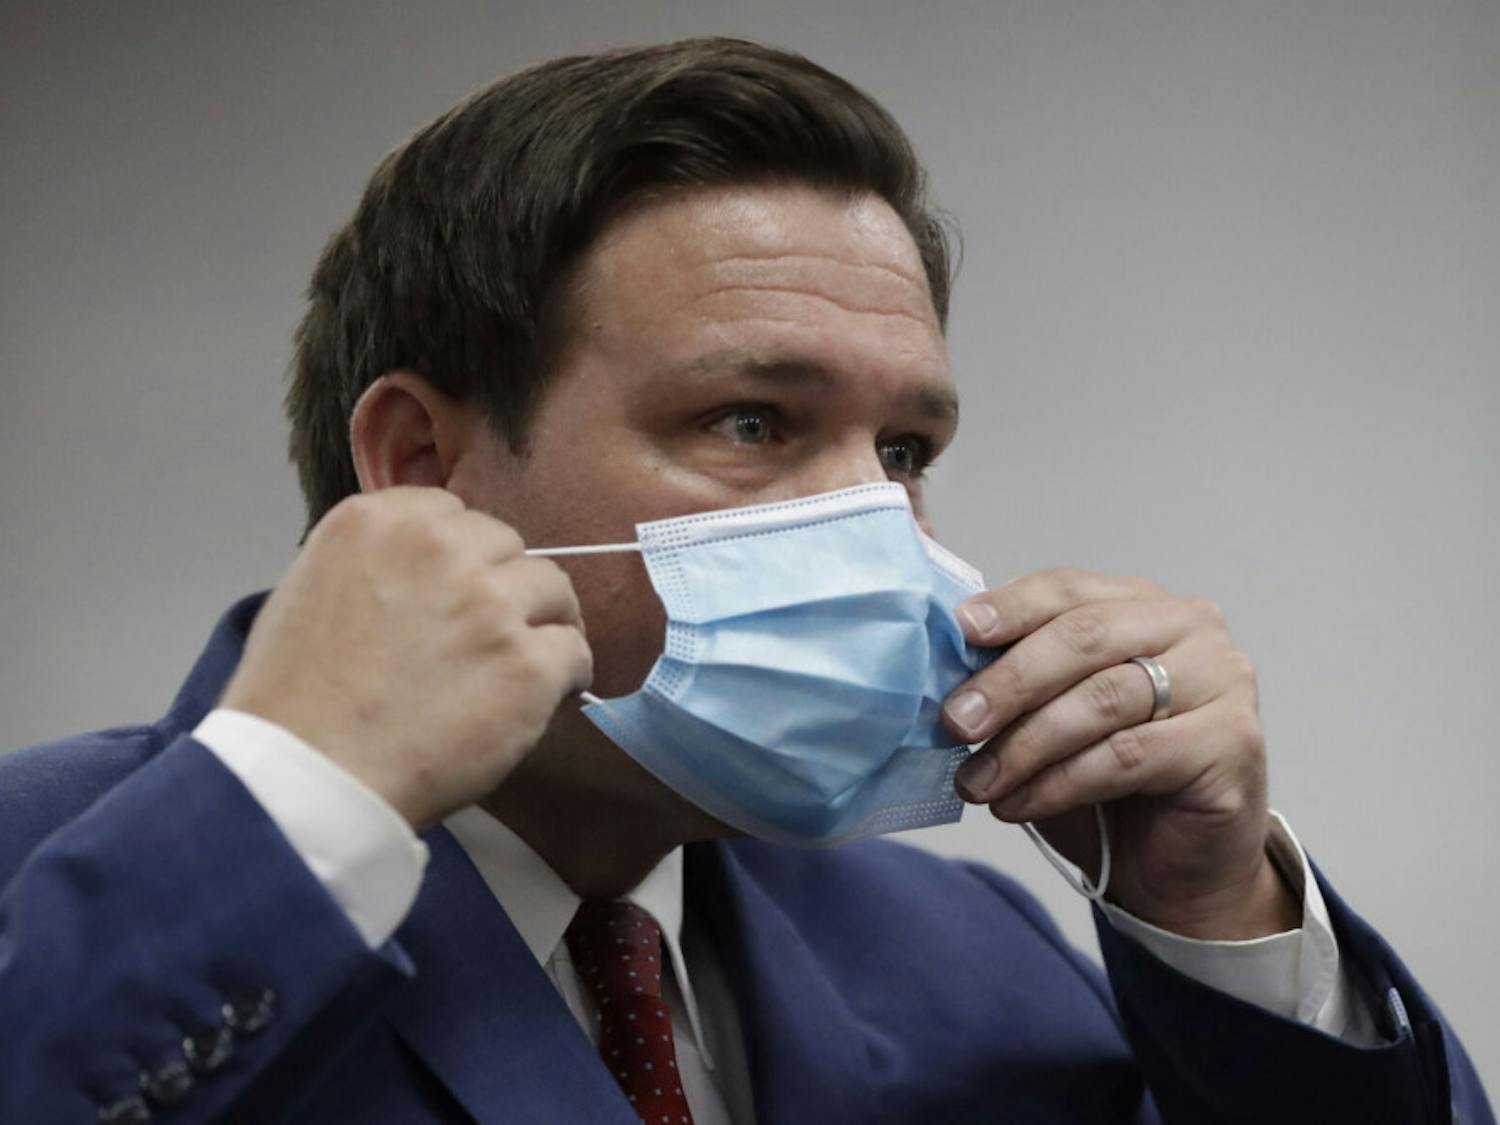 Florida Gov. Ron DeSantis puts on his mask as he leaves a news conference at Jackson Memorial Hospital, Monday, July 13, 2020, in Miami. DeSantis acknowledged Monday that the new coronavirus is spreading and urged people to take precautions such as wearing masks in public places, social distancing and avoiding crowds. (AP Photo/Wilfredo Lee)